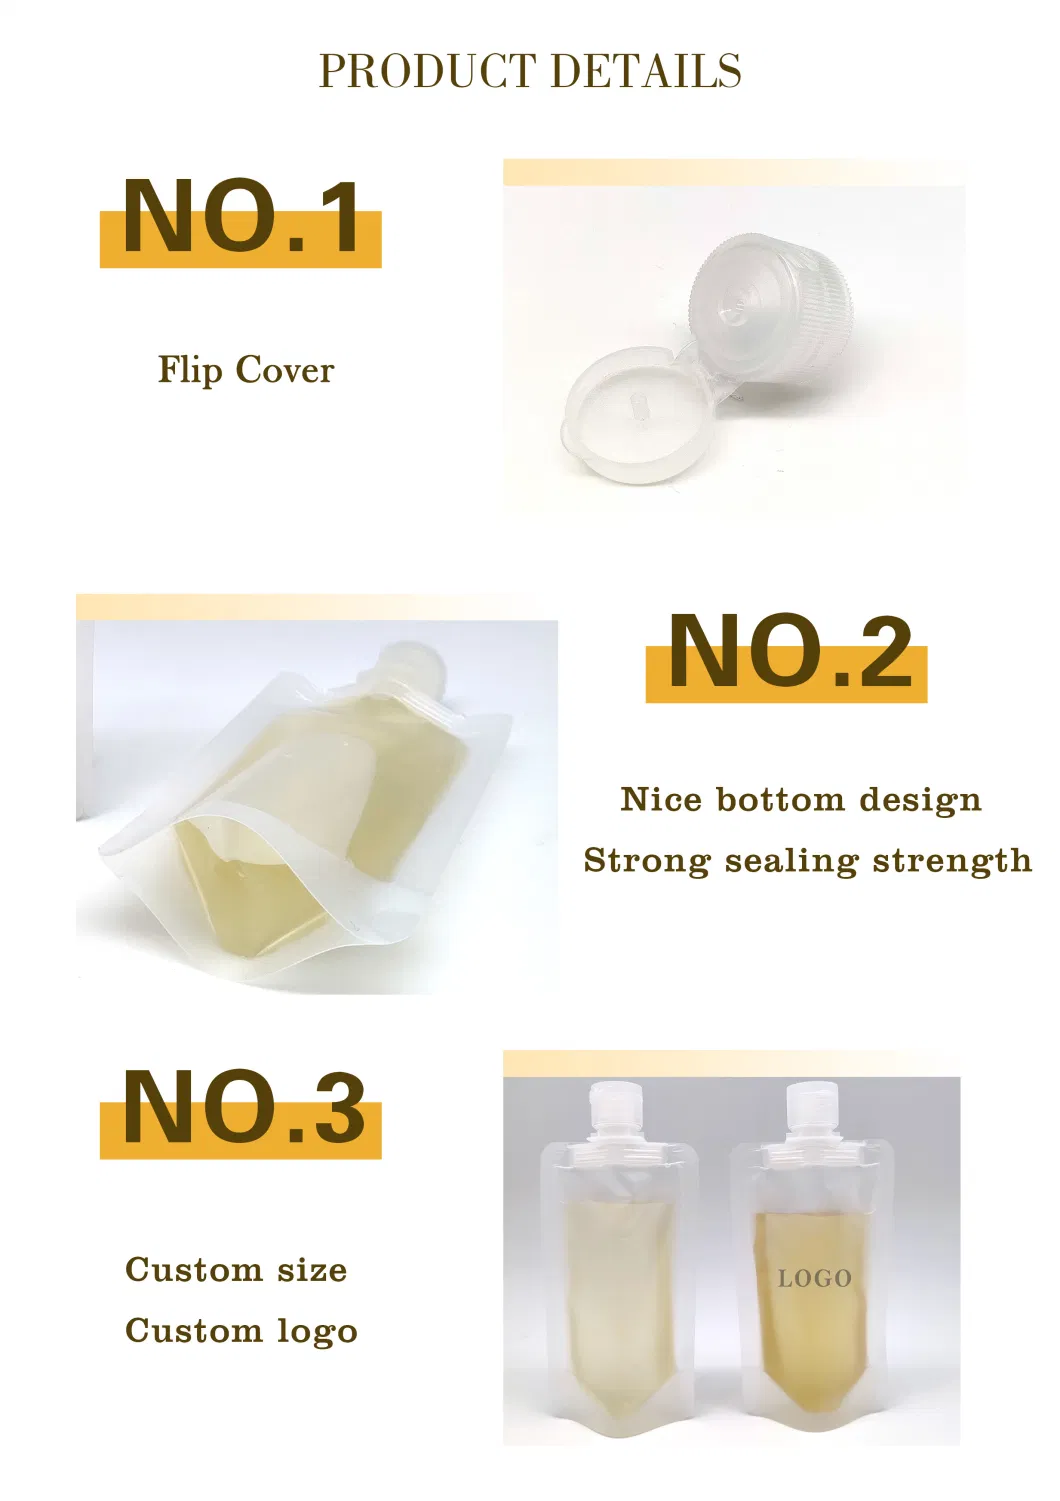 30ml 50ml 200ml Travel Lotion Bag Refillable Empty Squeeze Leakproof Pouch Stand up Pouch Lotion Shampoo Travel Packaging Bag